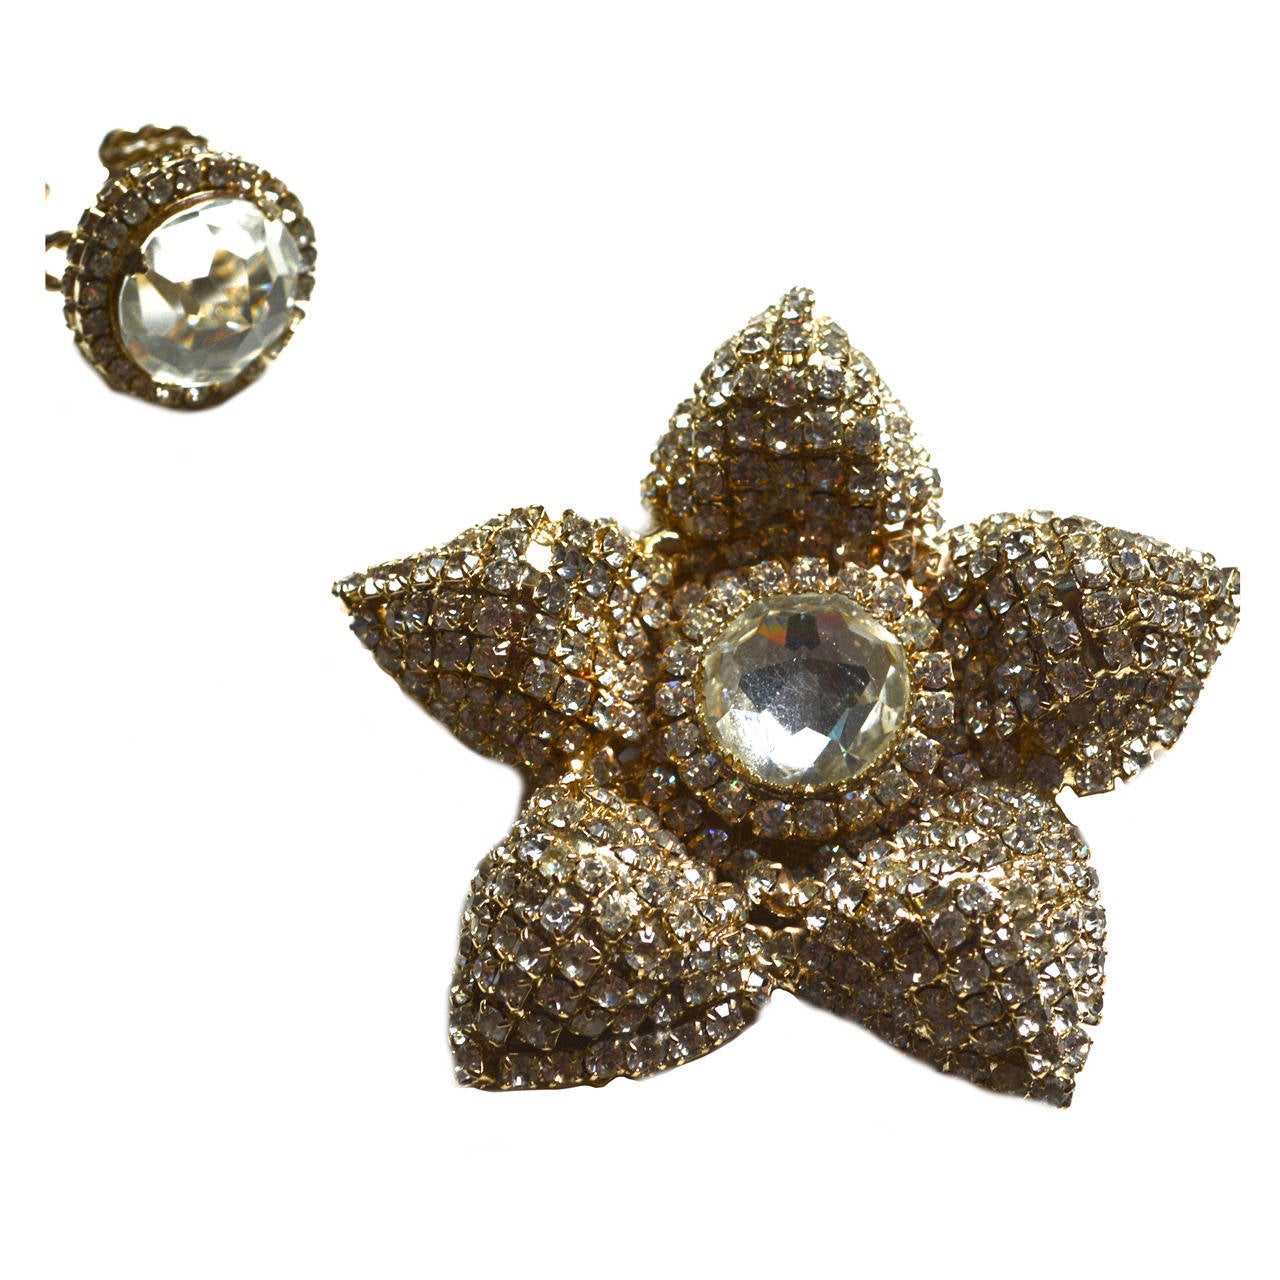 Oversized floral brooch with cut glass accents and rhinestones. Signed. The cocktail ring has a beautiful stone and is adjustable.  Excellent condition. Ring is adjustable. Set at a size 7. Face is 1